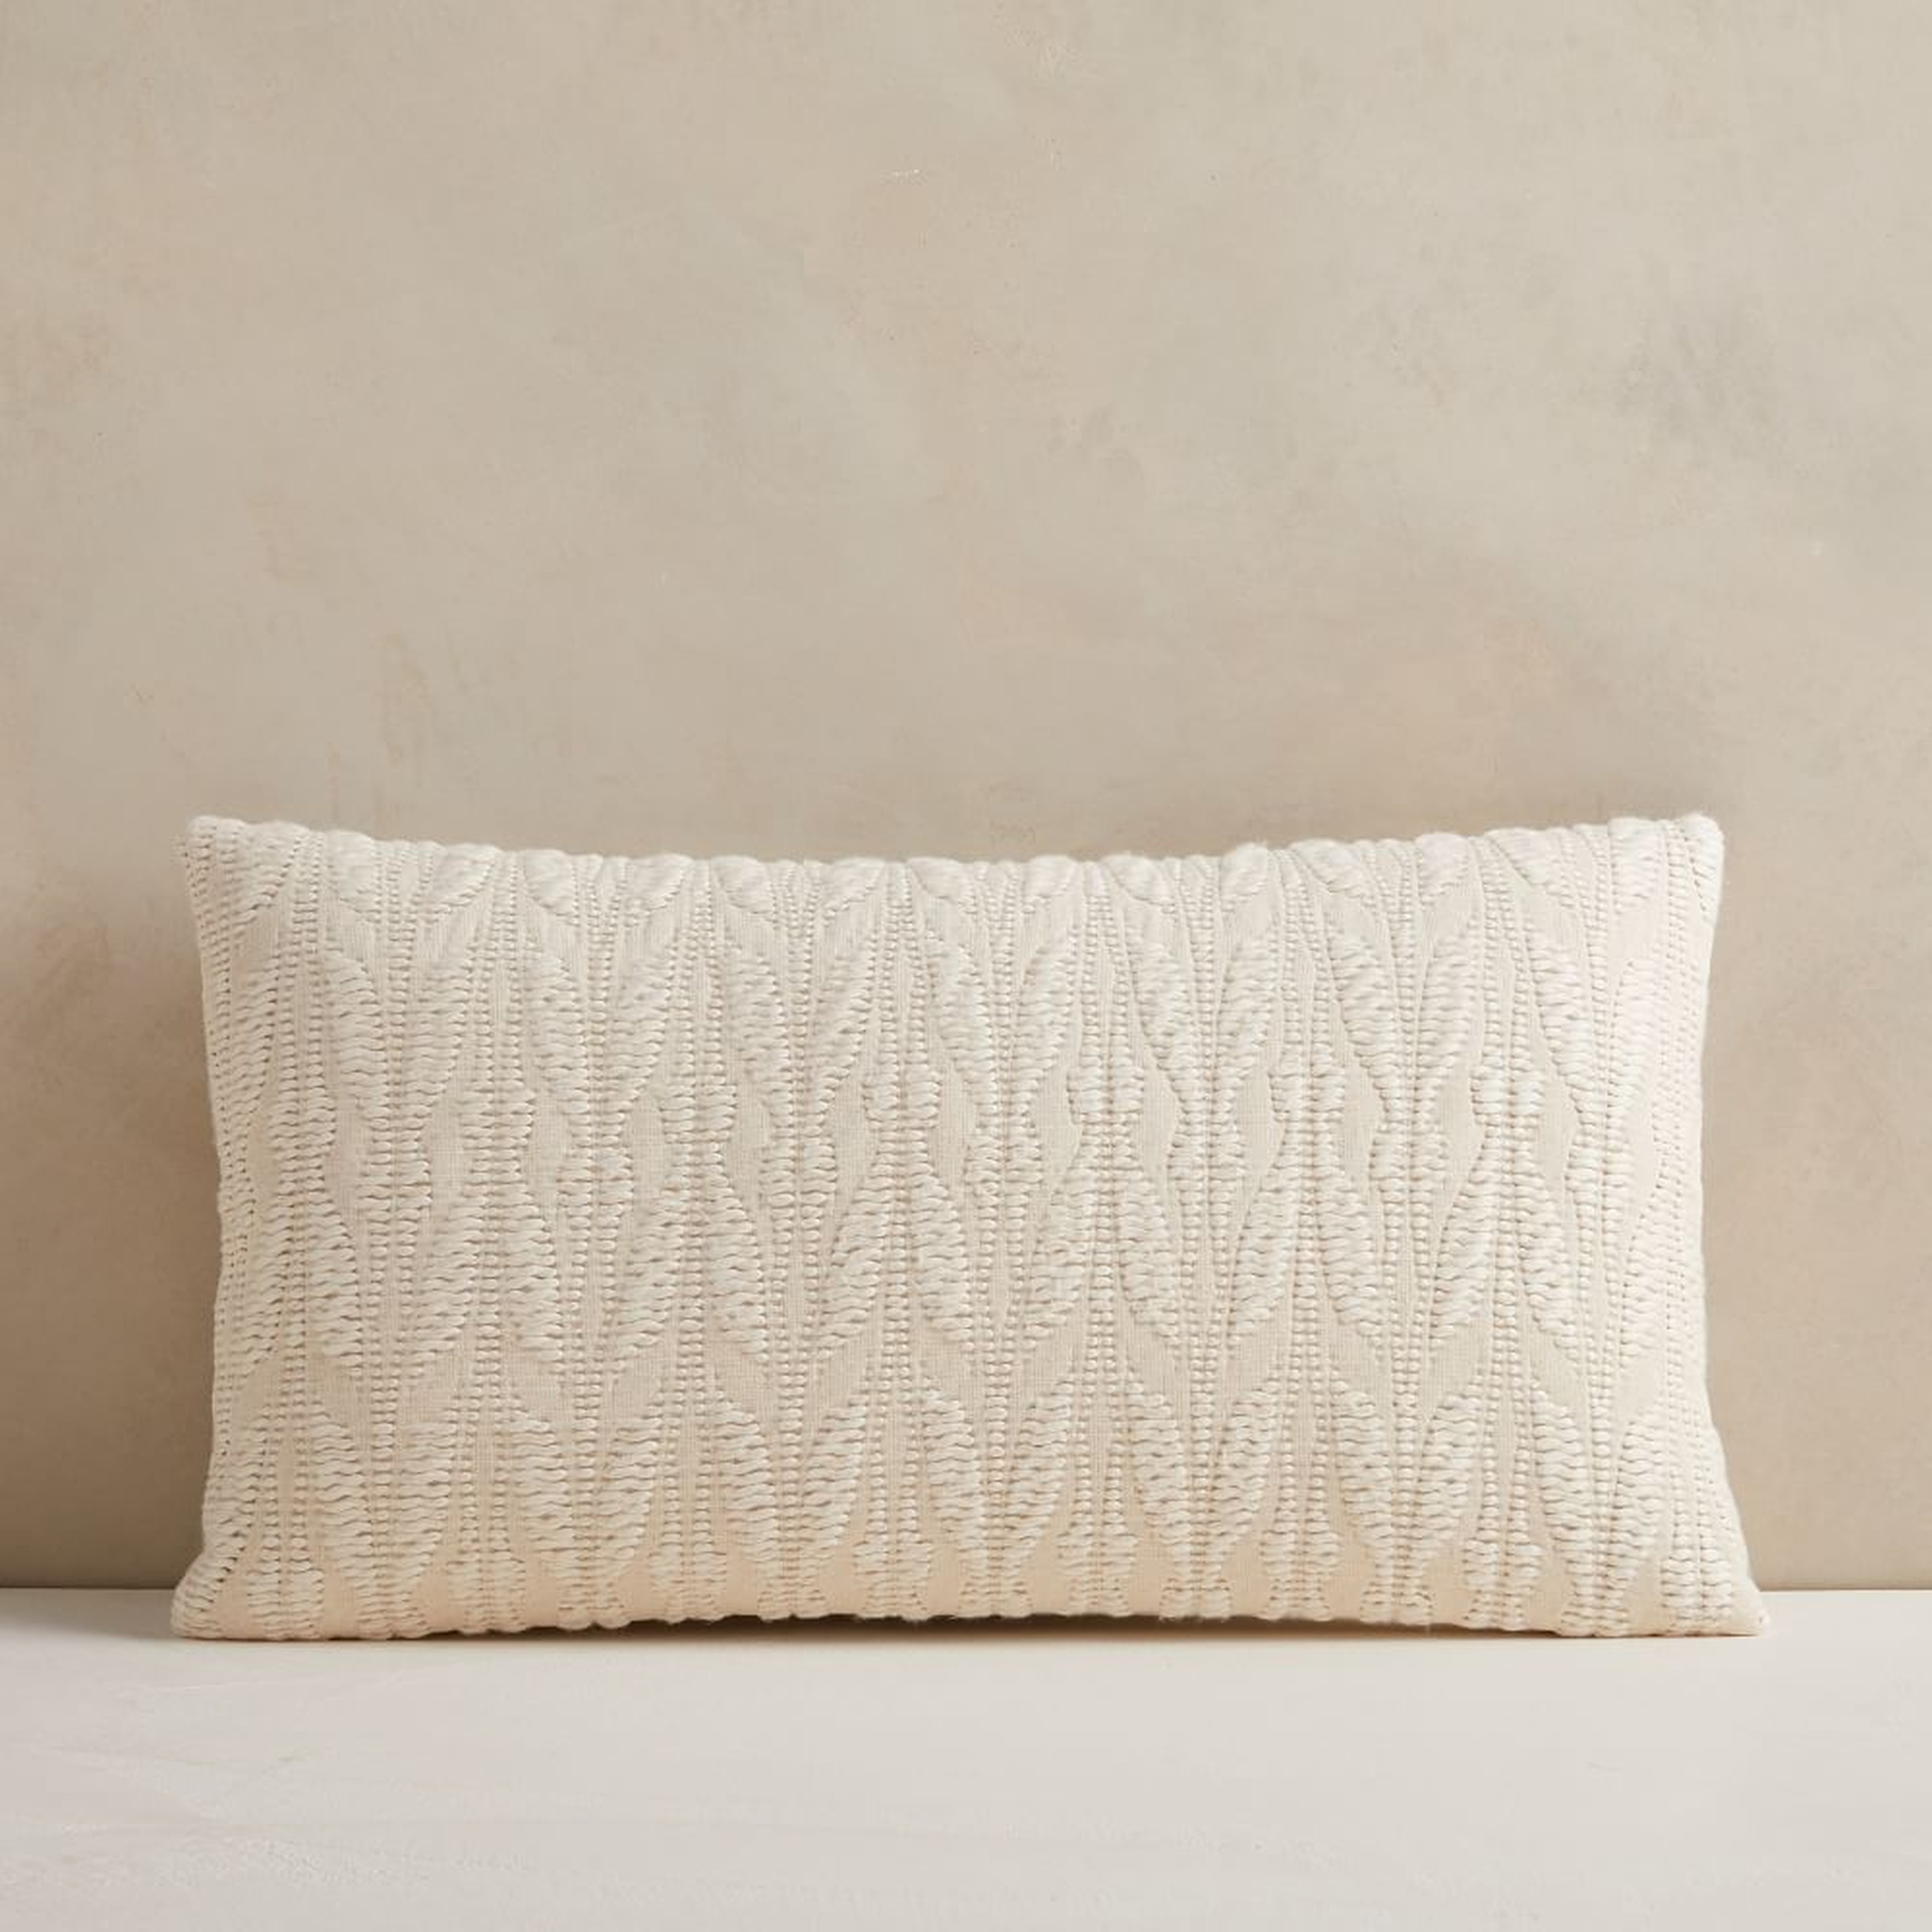 Mariposa Pillow Cover, 12"x21", White, Set of 2 - West Elm